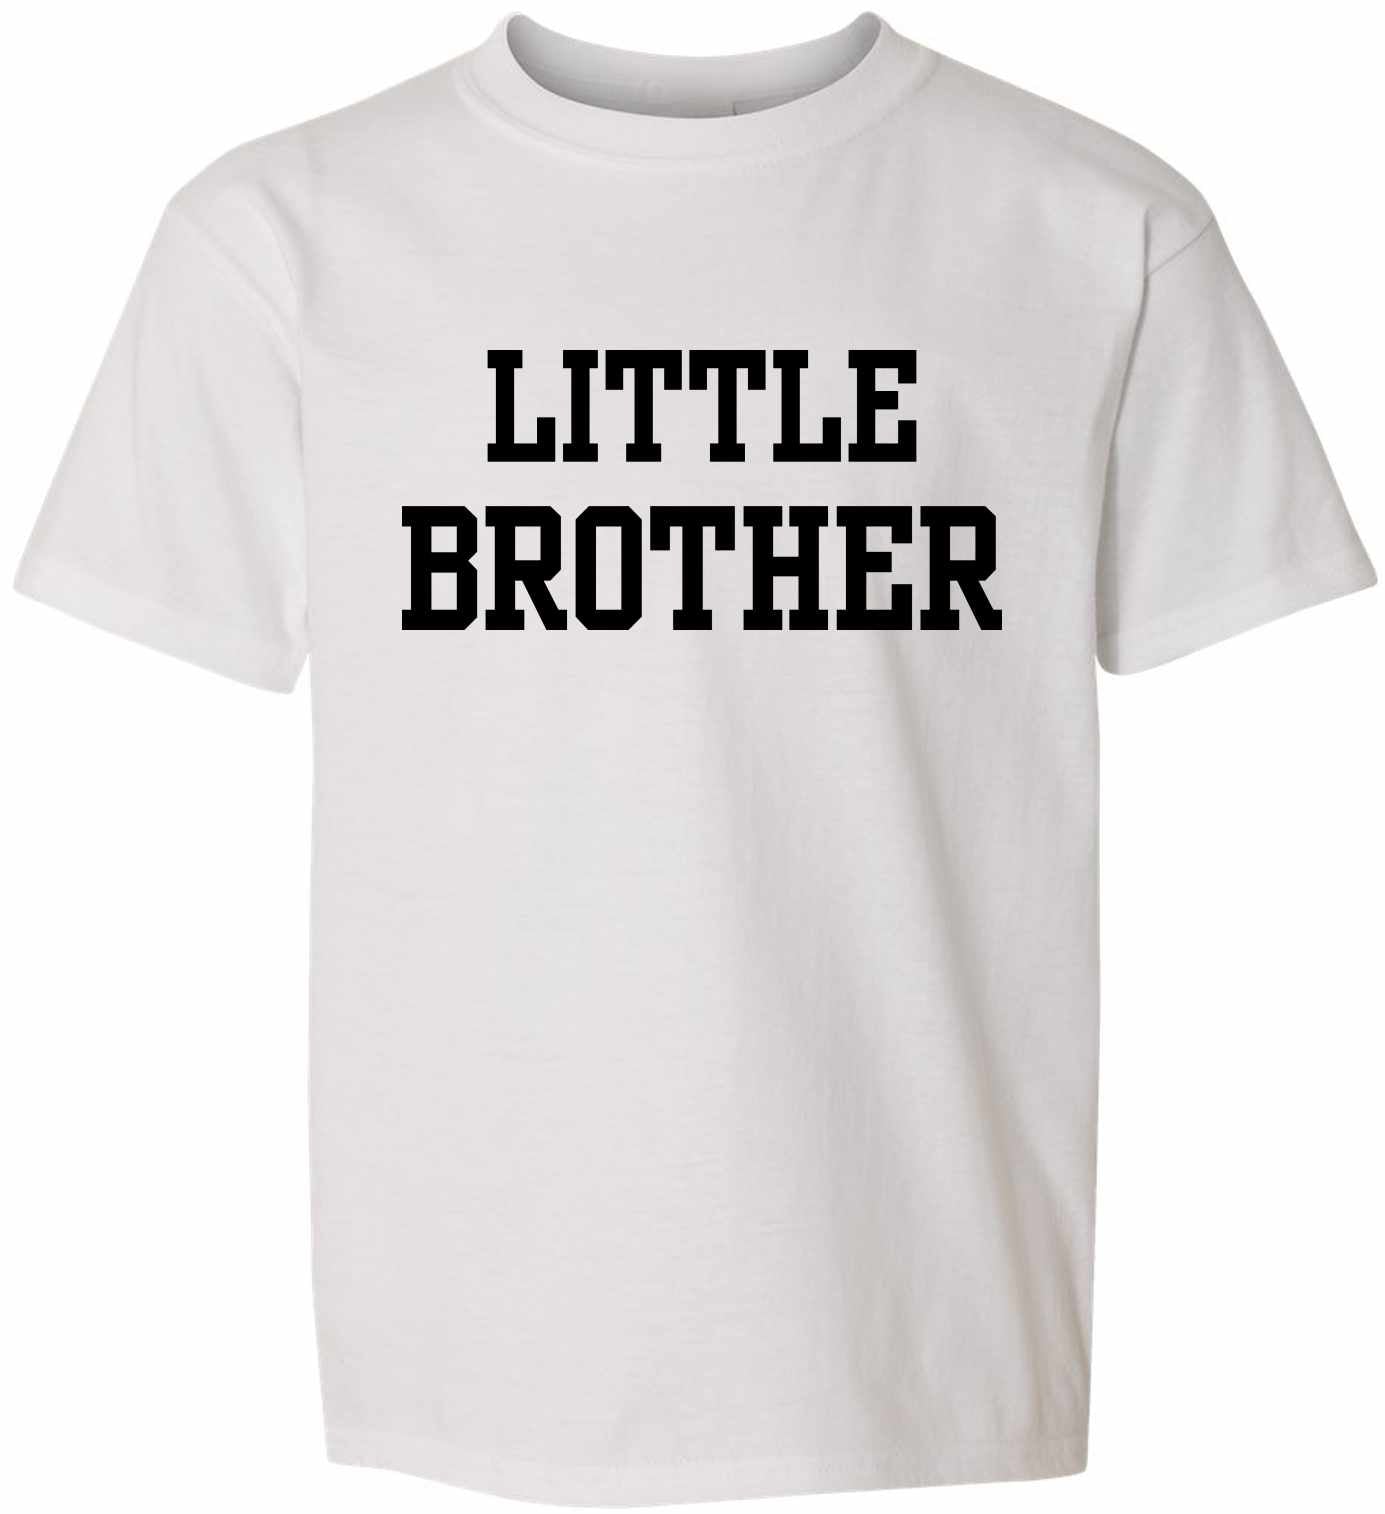 LITTLE BROTHER on Kids T-Shirt (#1111-201)